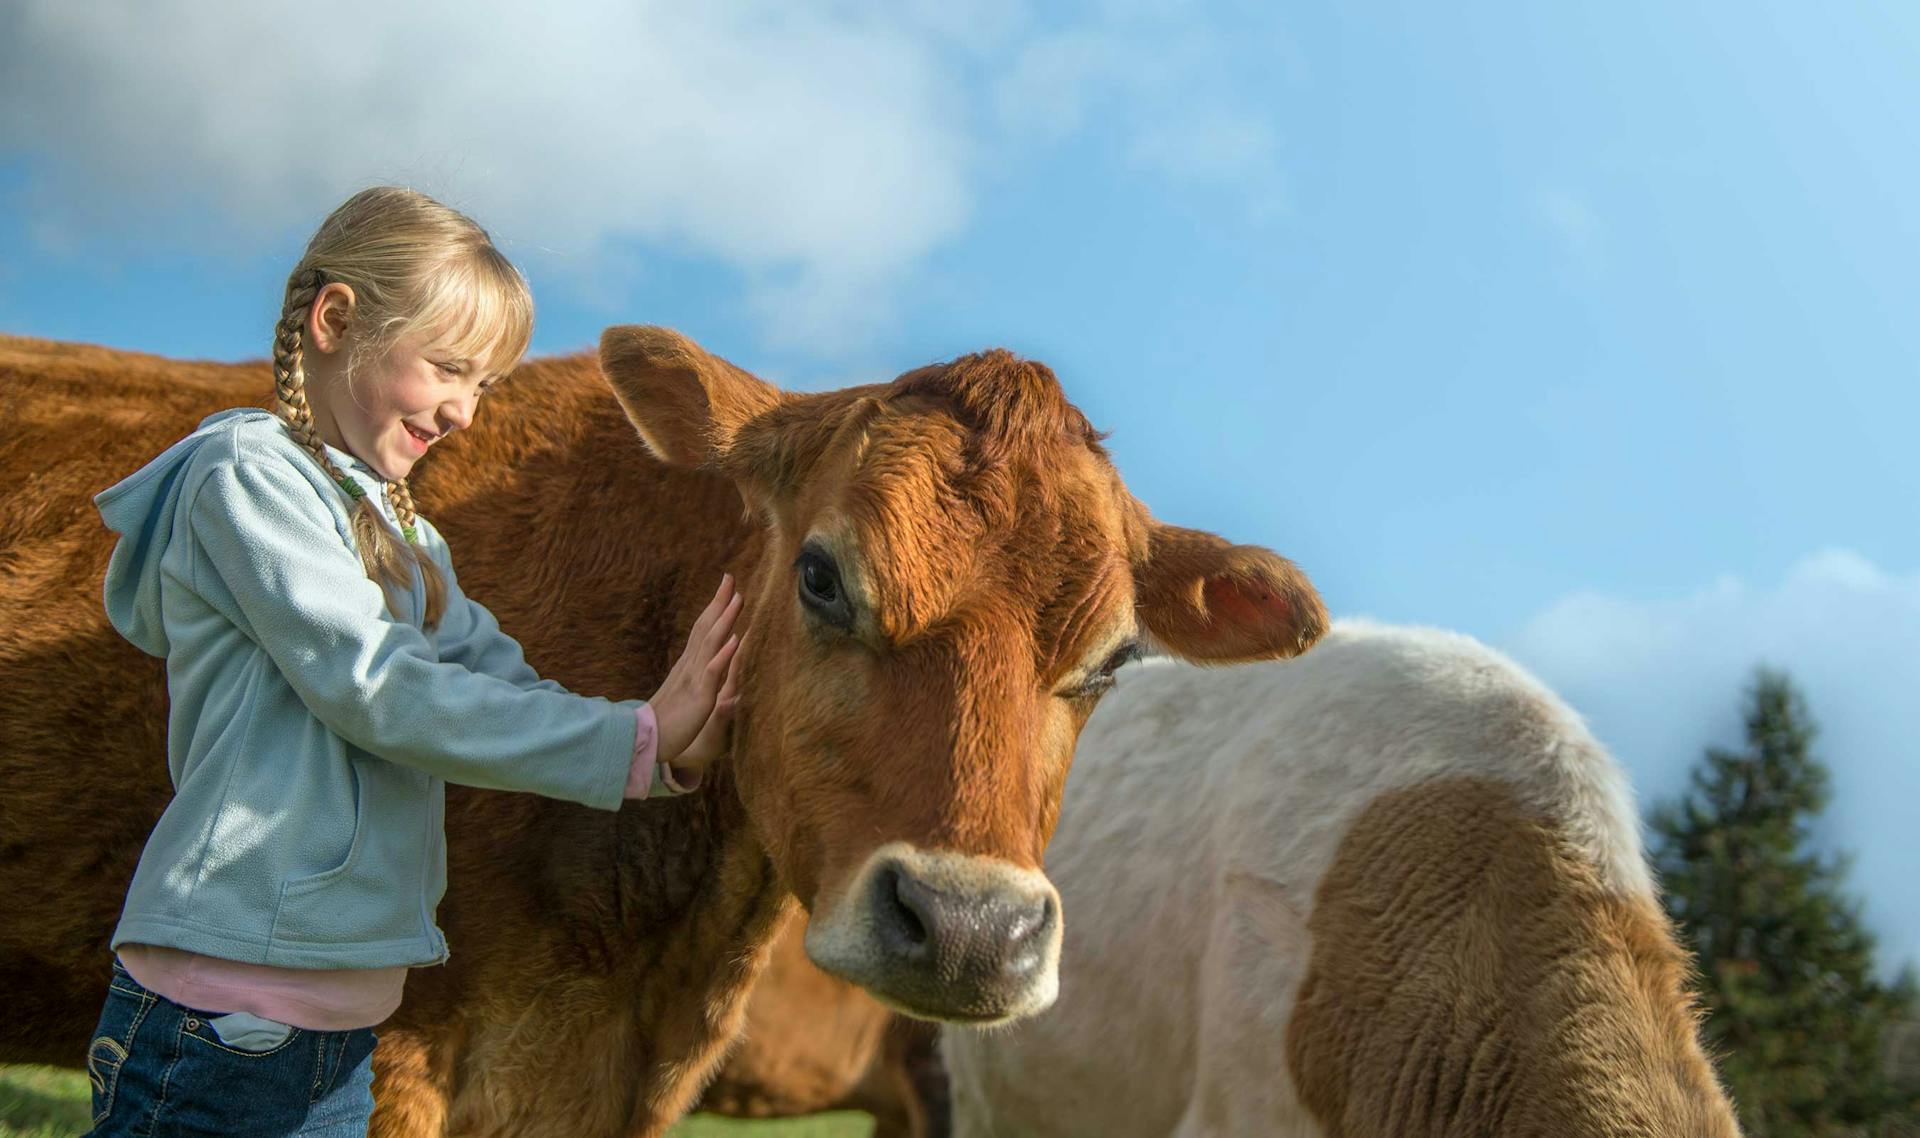 A young girl standing next to two cows in a field while petting one on its cheek.